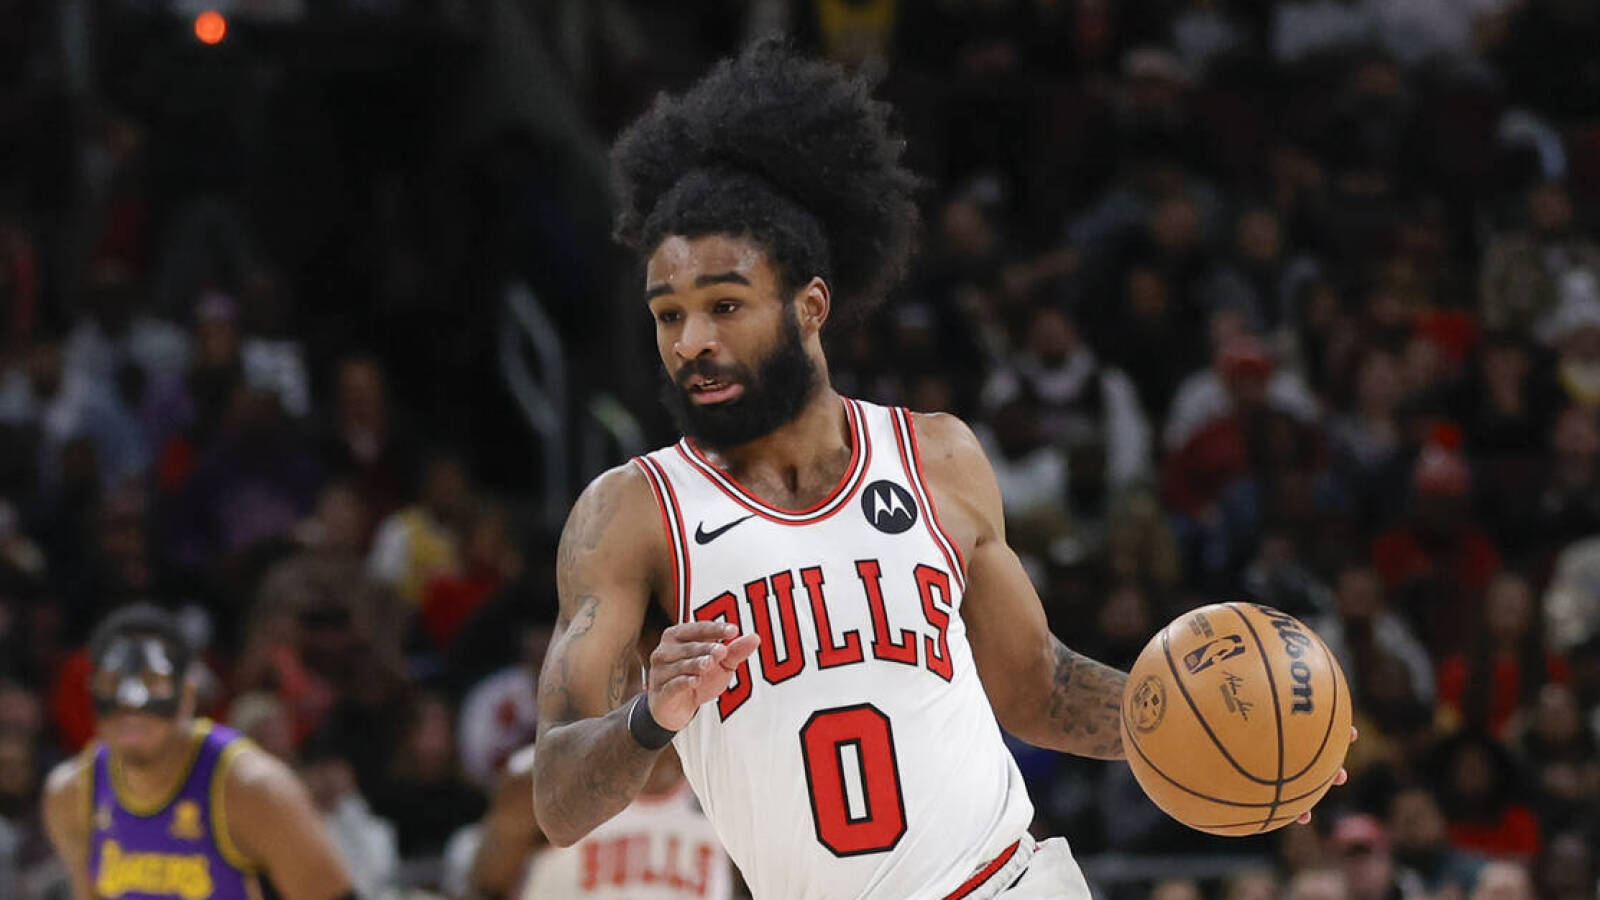 Coby White's emergence, hot streak should not steer Bulls off course